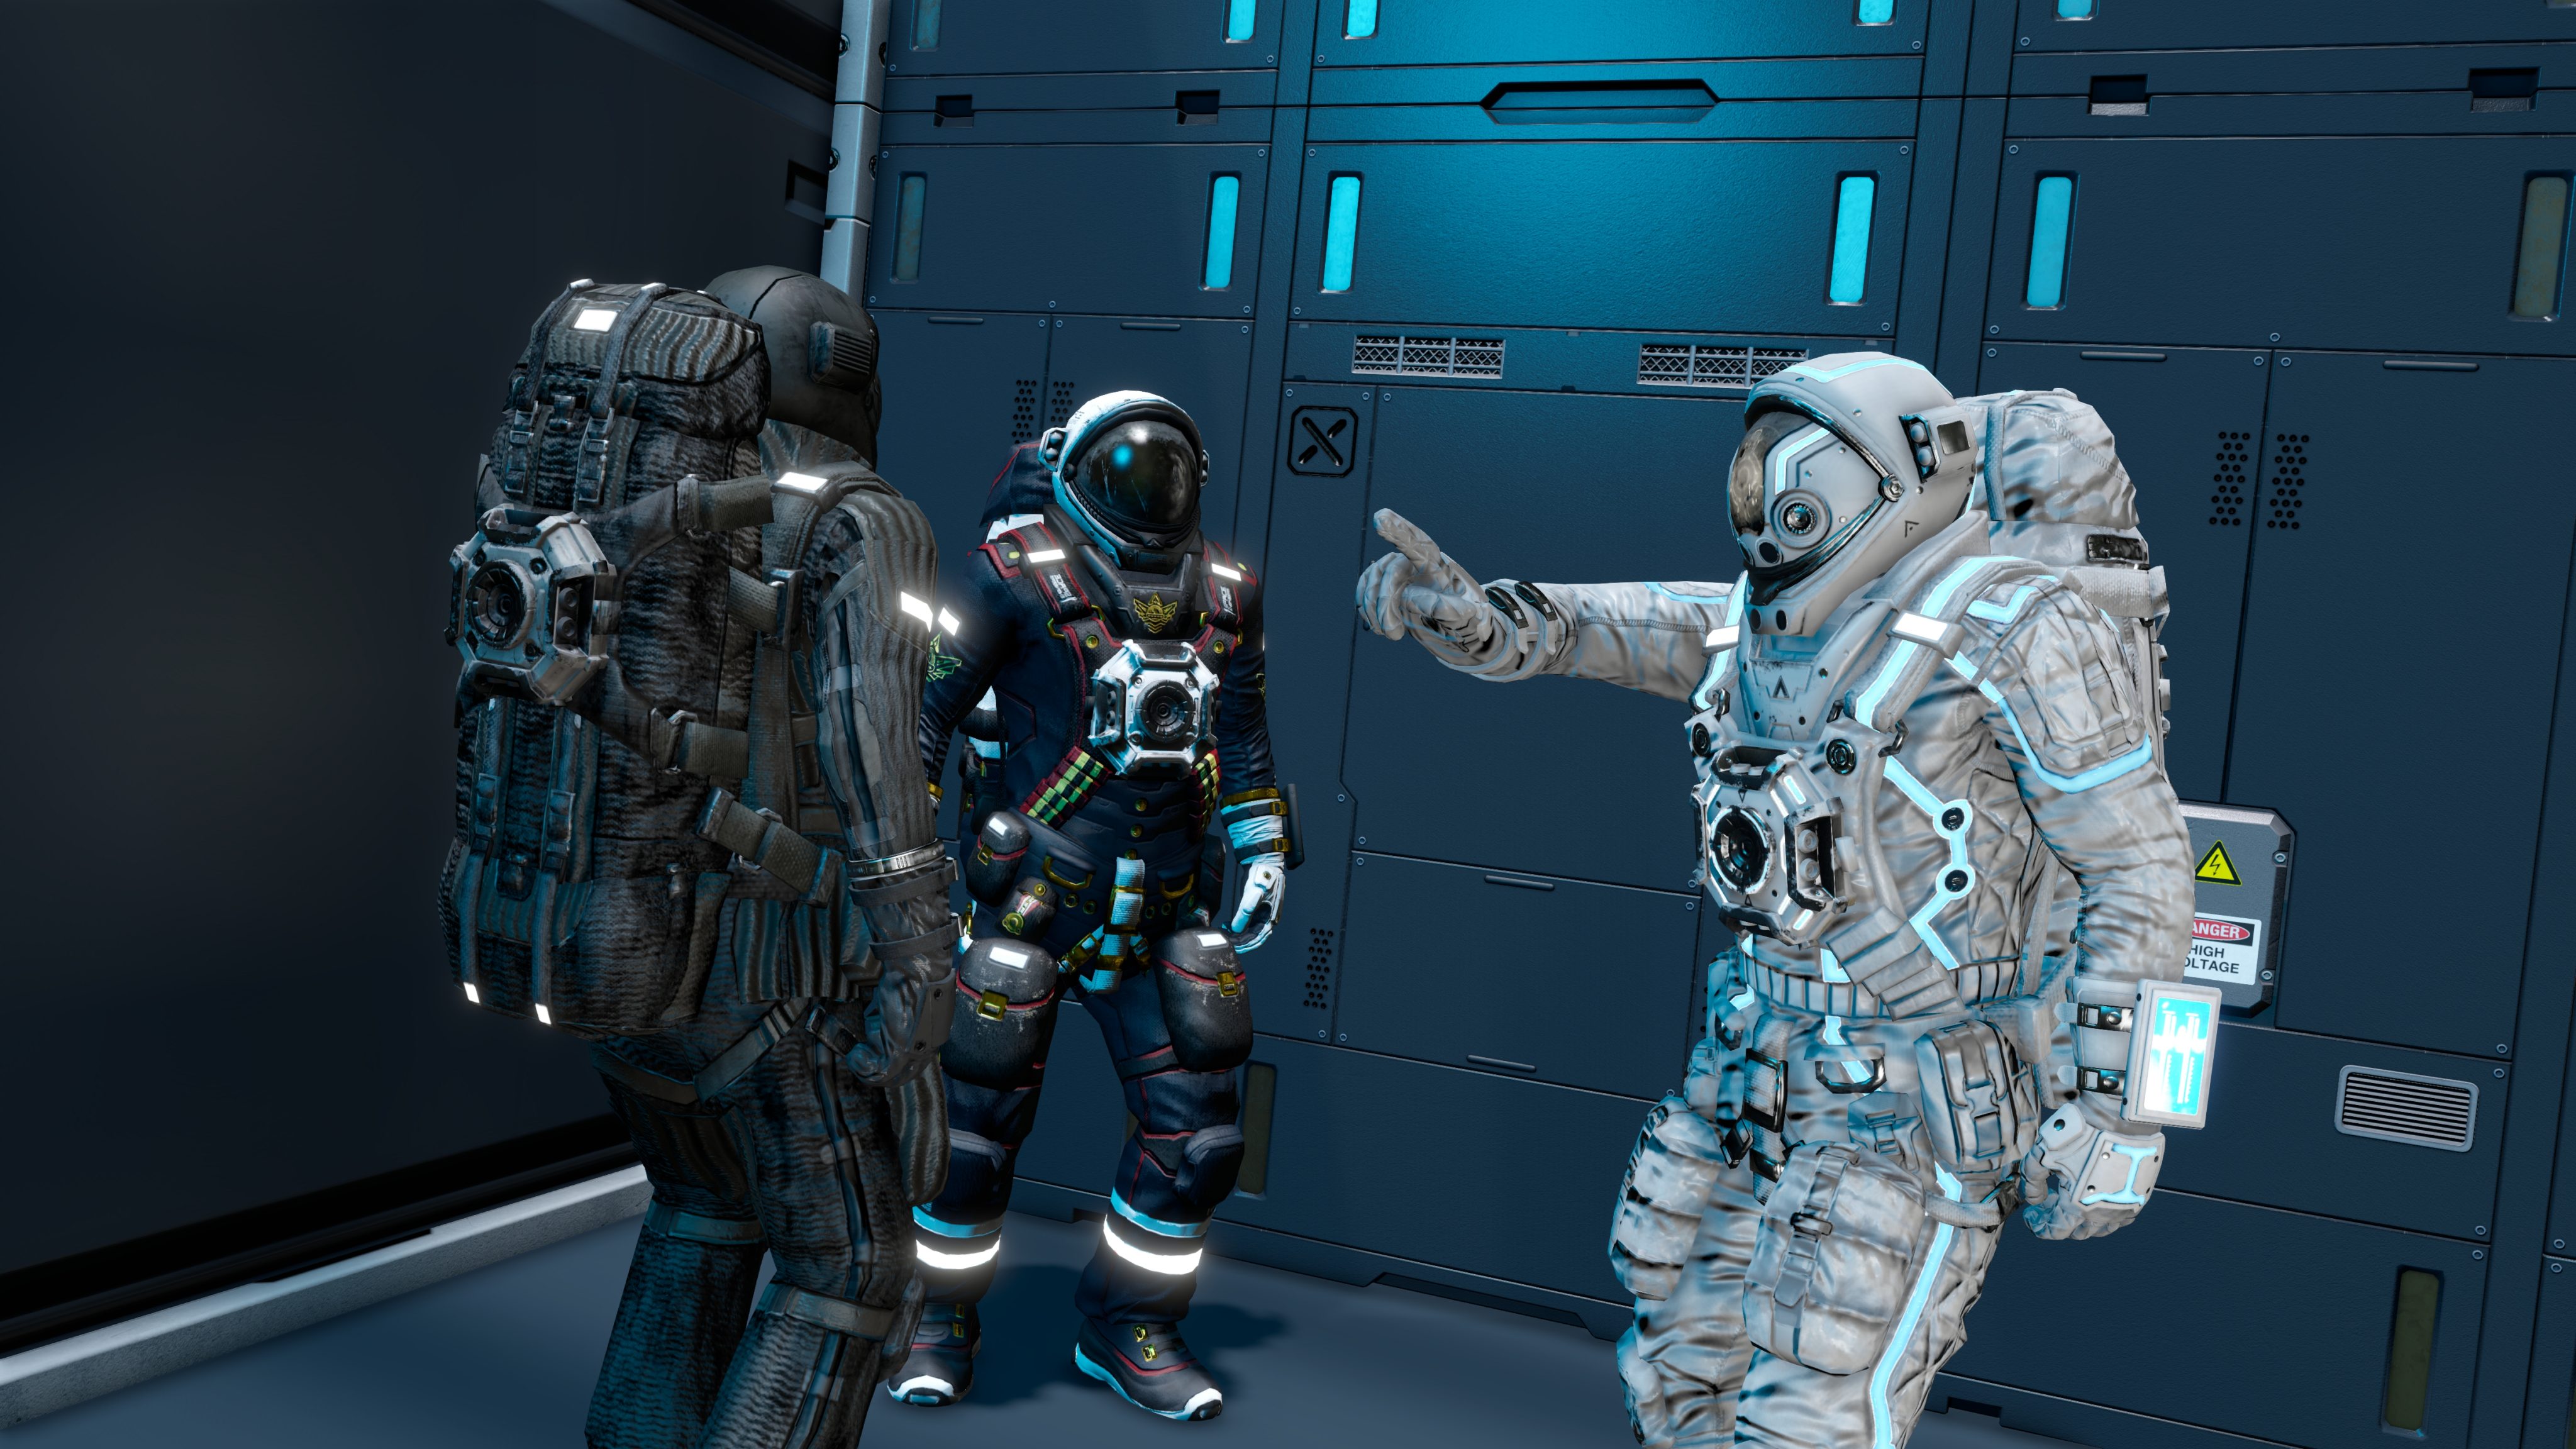 HD desktop wallpaper featuring space engineers in a spacecraft interior, with one astronaut gesturing during a discussion.